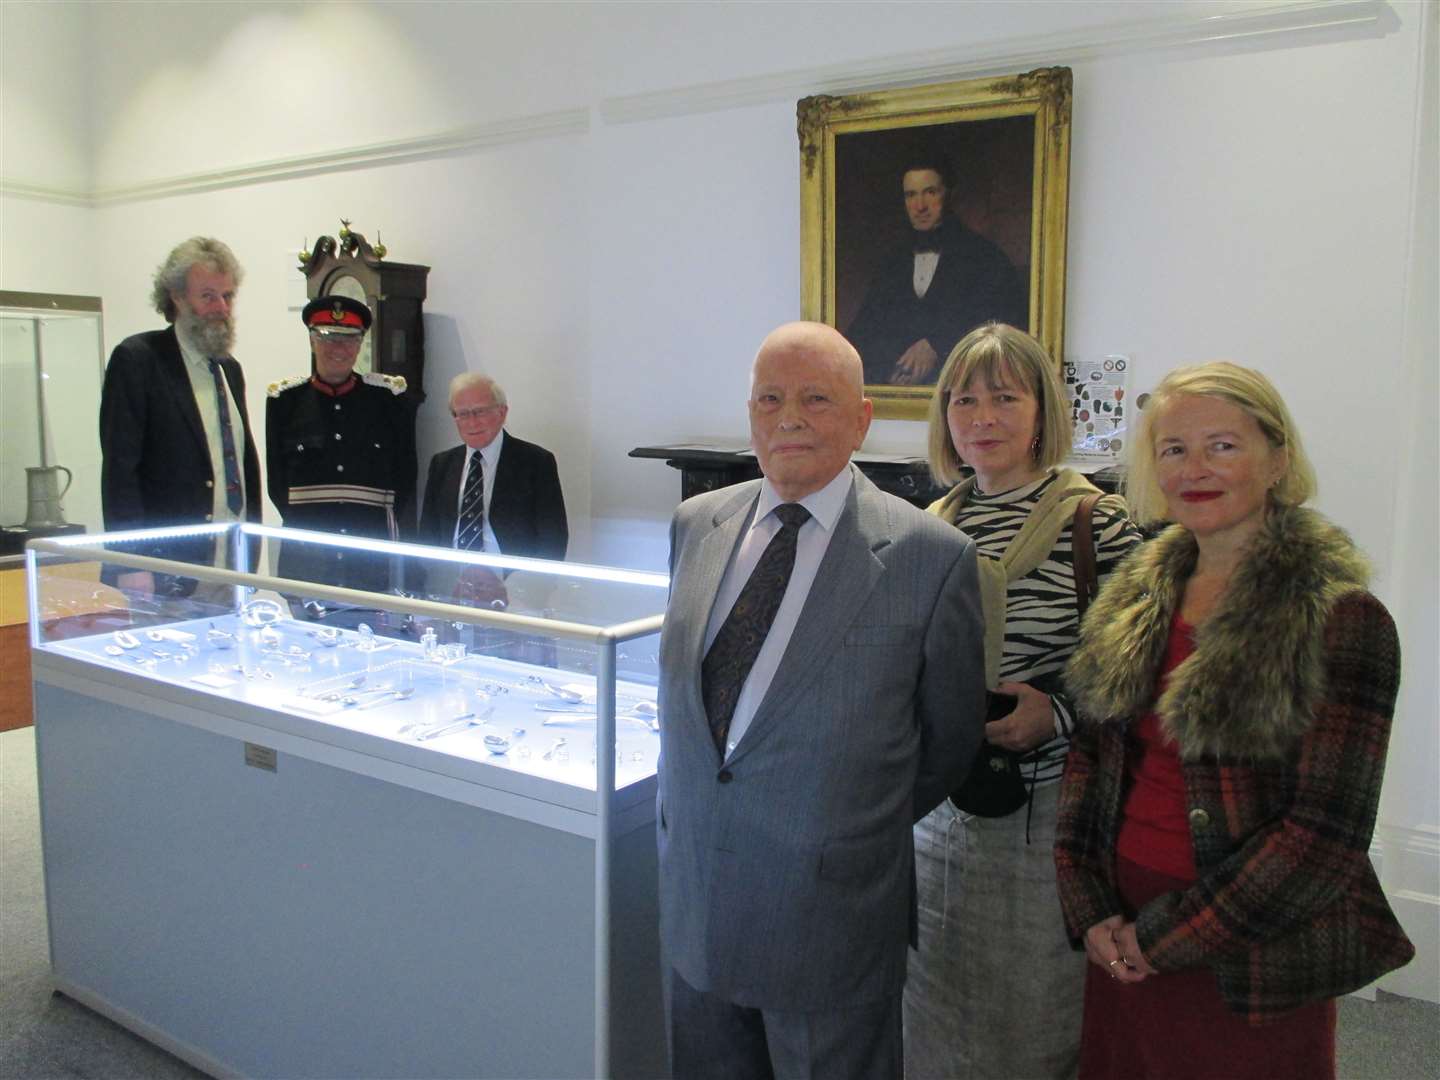 Geof Nuttall with his daughters Claire and Celia at the ceremony along with Lord Lieutenant of Banffshire Andrew Simpson, Alistair Mason and Julian Watson from the Museum of Banff.